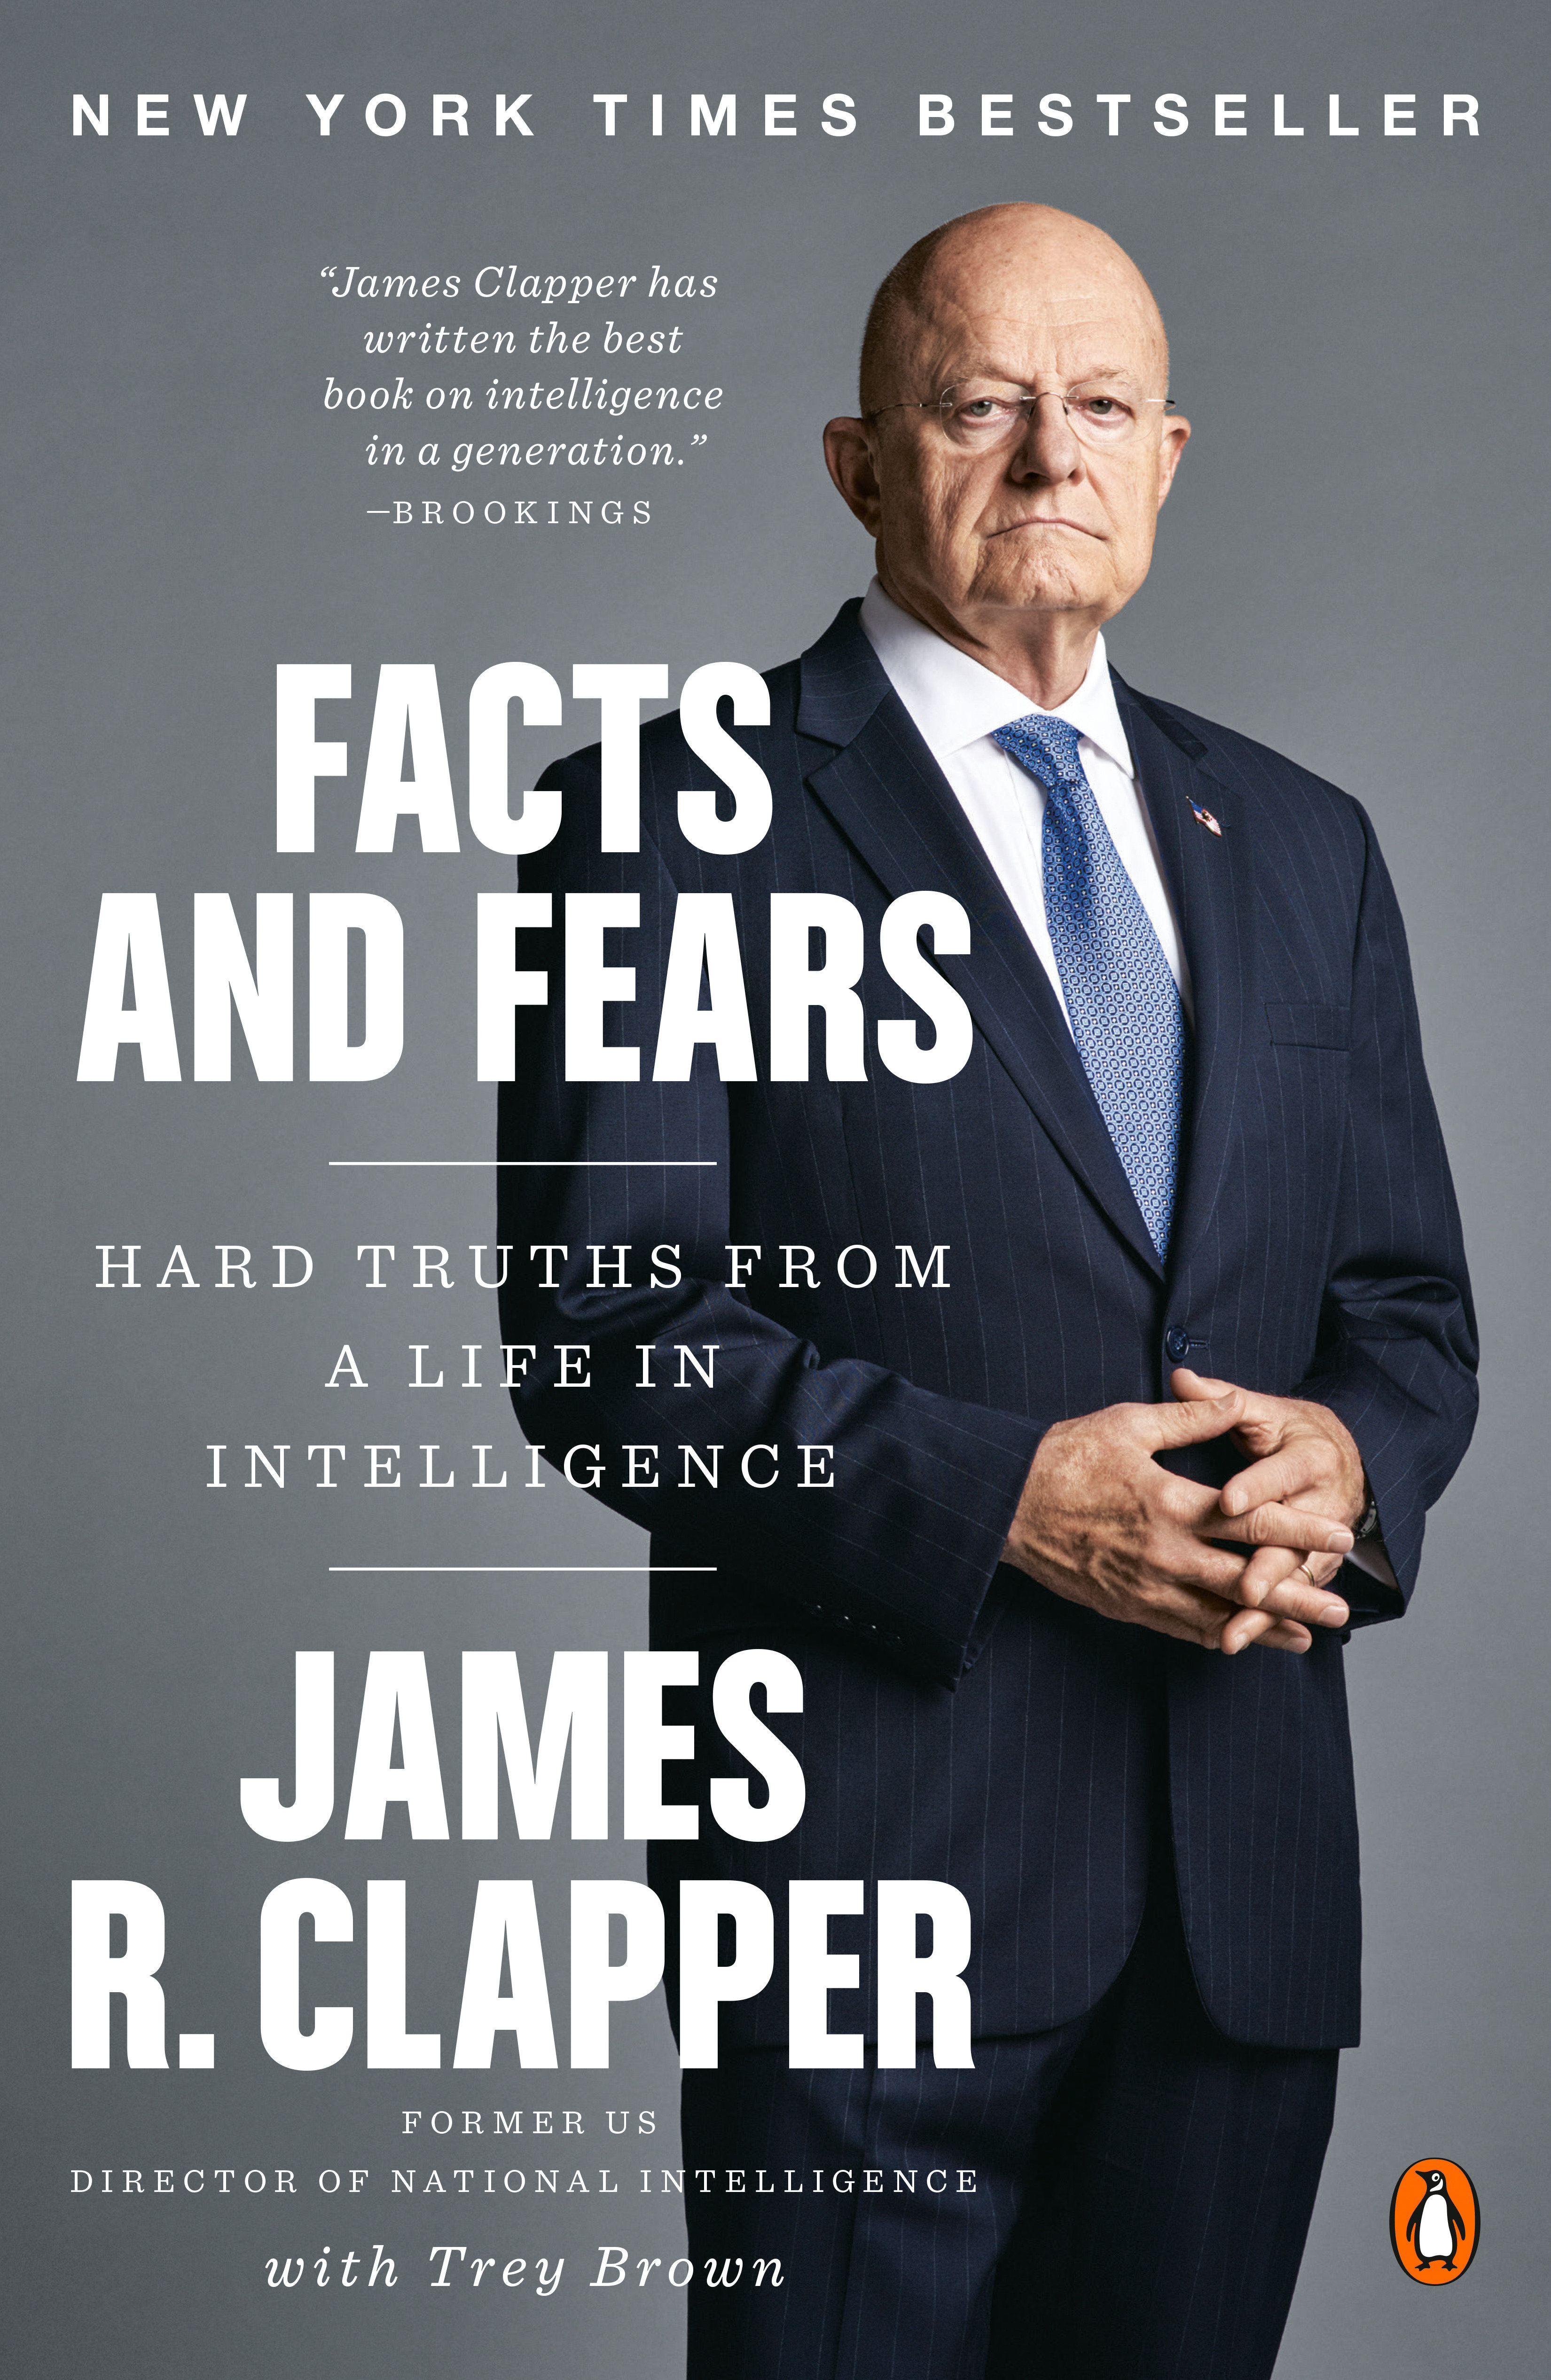 Facts and fears hard truths from a life in intelligence cover image